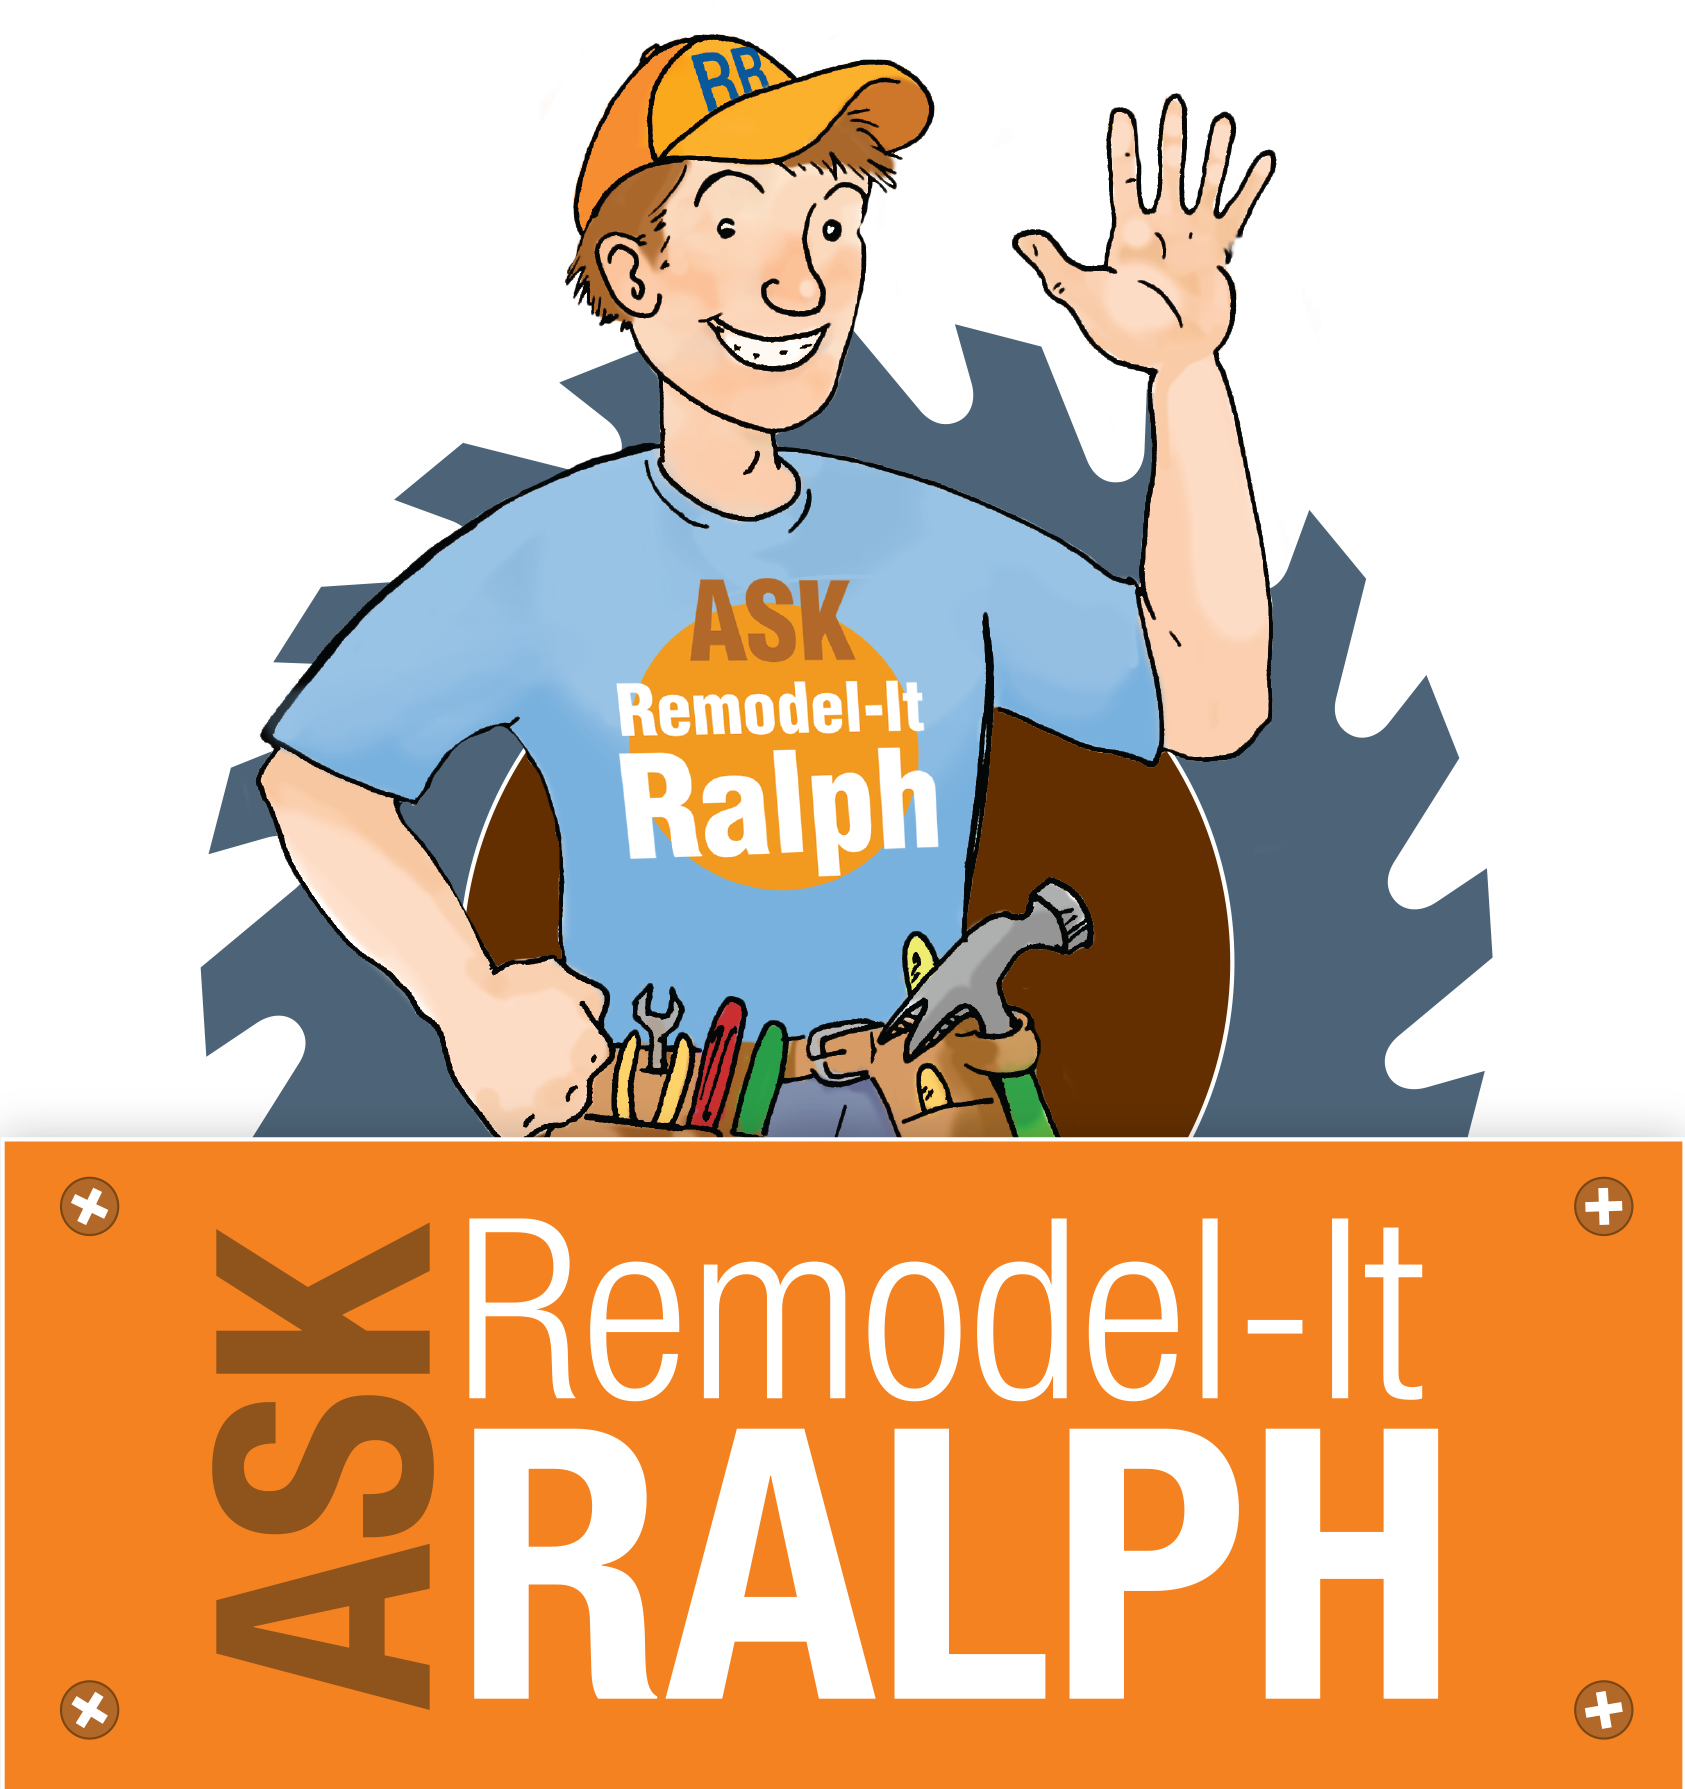 Ask Remodel-it Ralph - The Basic Companies - Ask an Expert